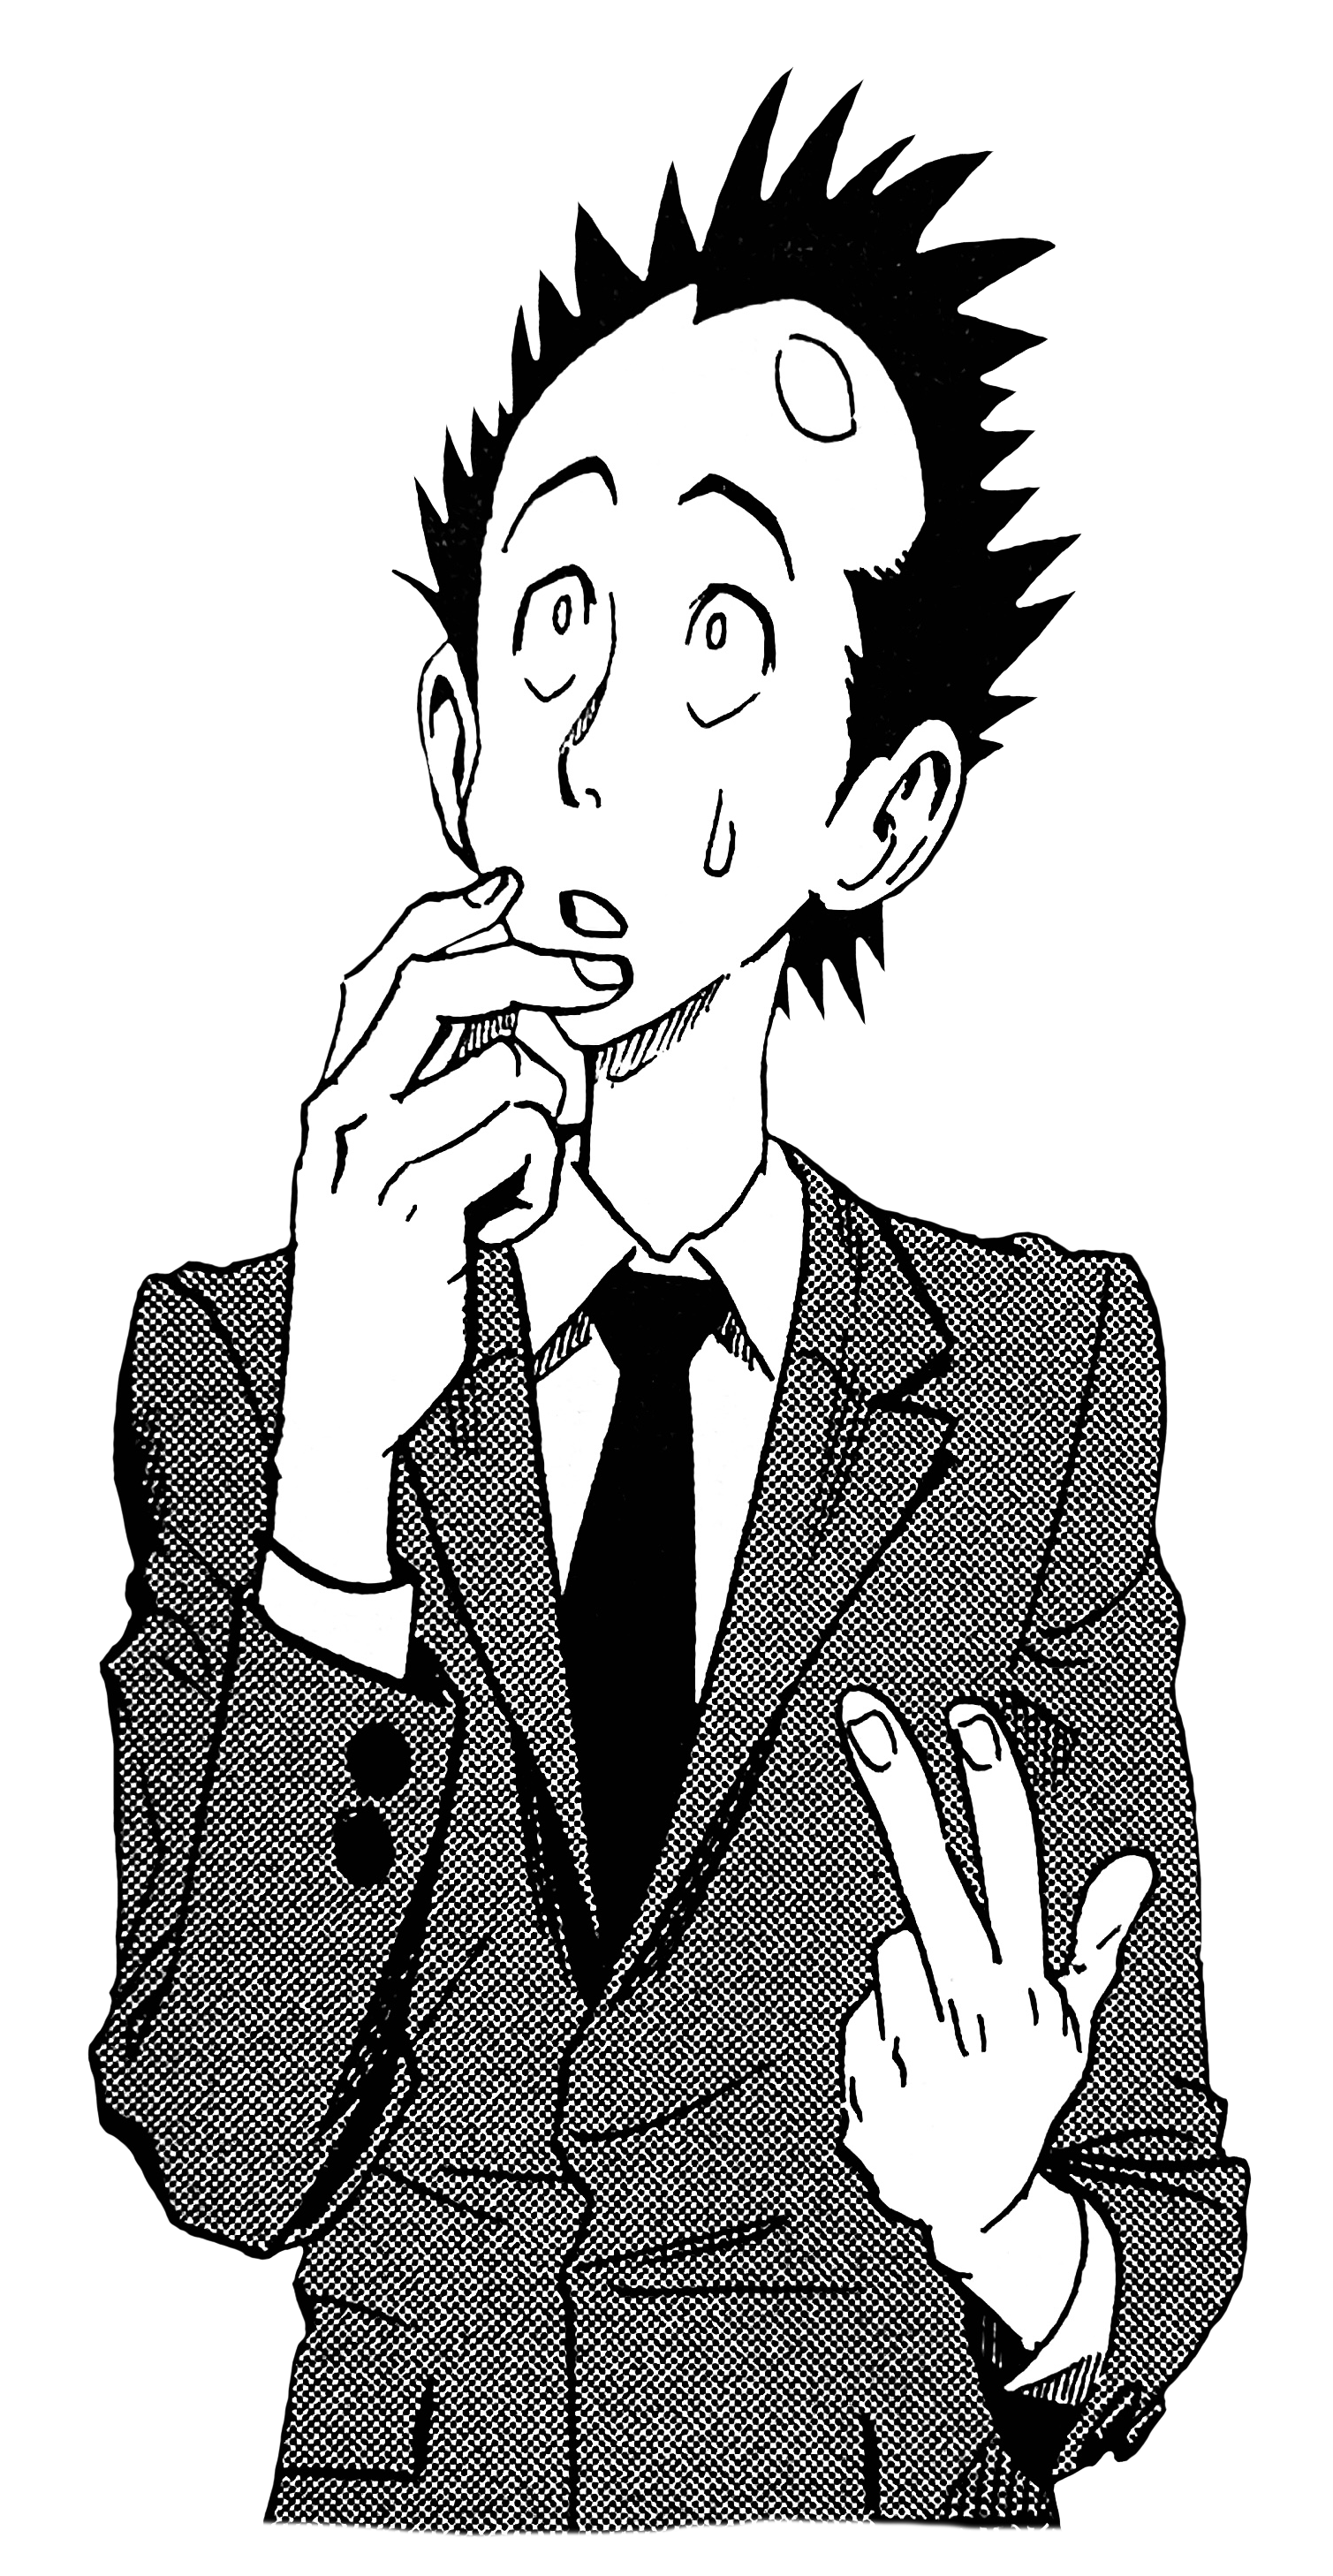 A transparent illustration of Yukimitsu in a suit and tie. He's a tall, skinny teenager with a large, shiny forehead; his hair is spiky and combed back, almost appearing as though he's balding. He's looking up in thought while counting on his fingers.